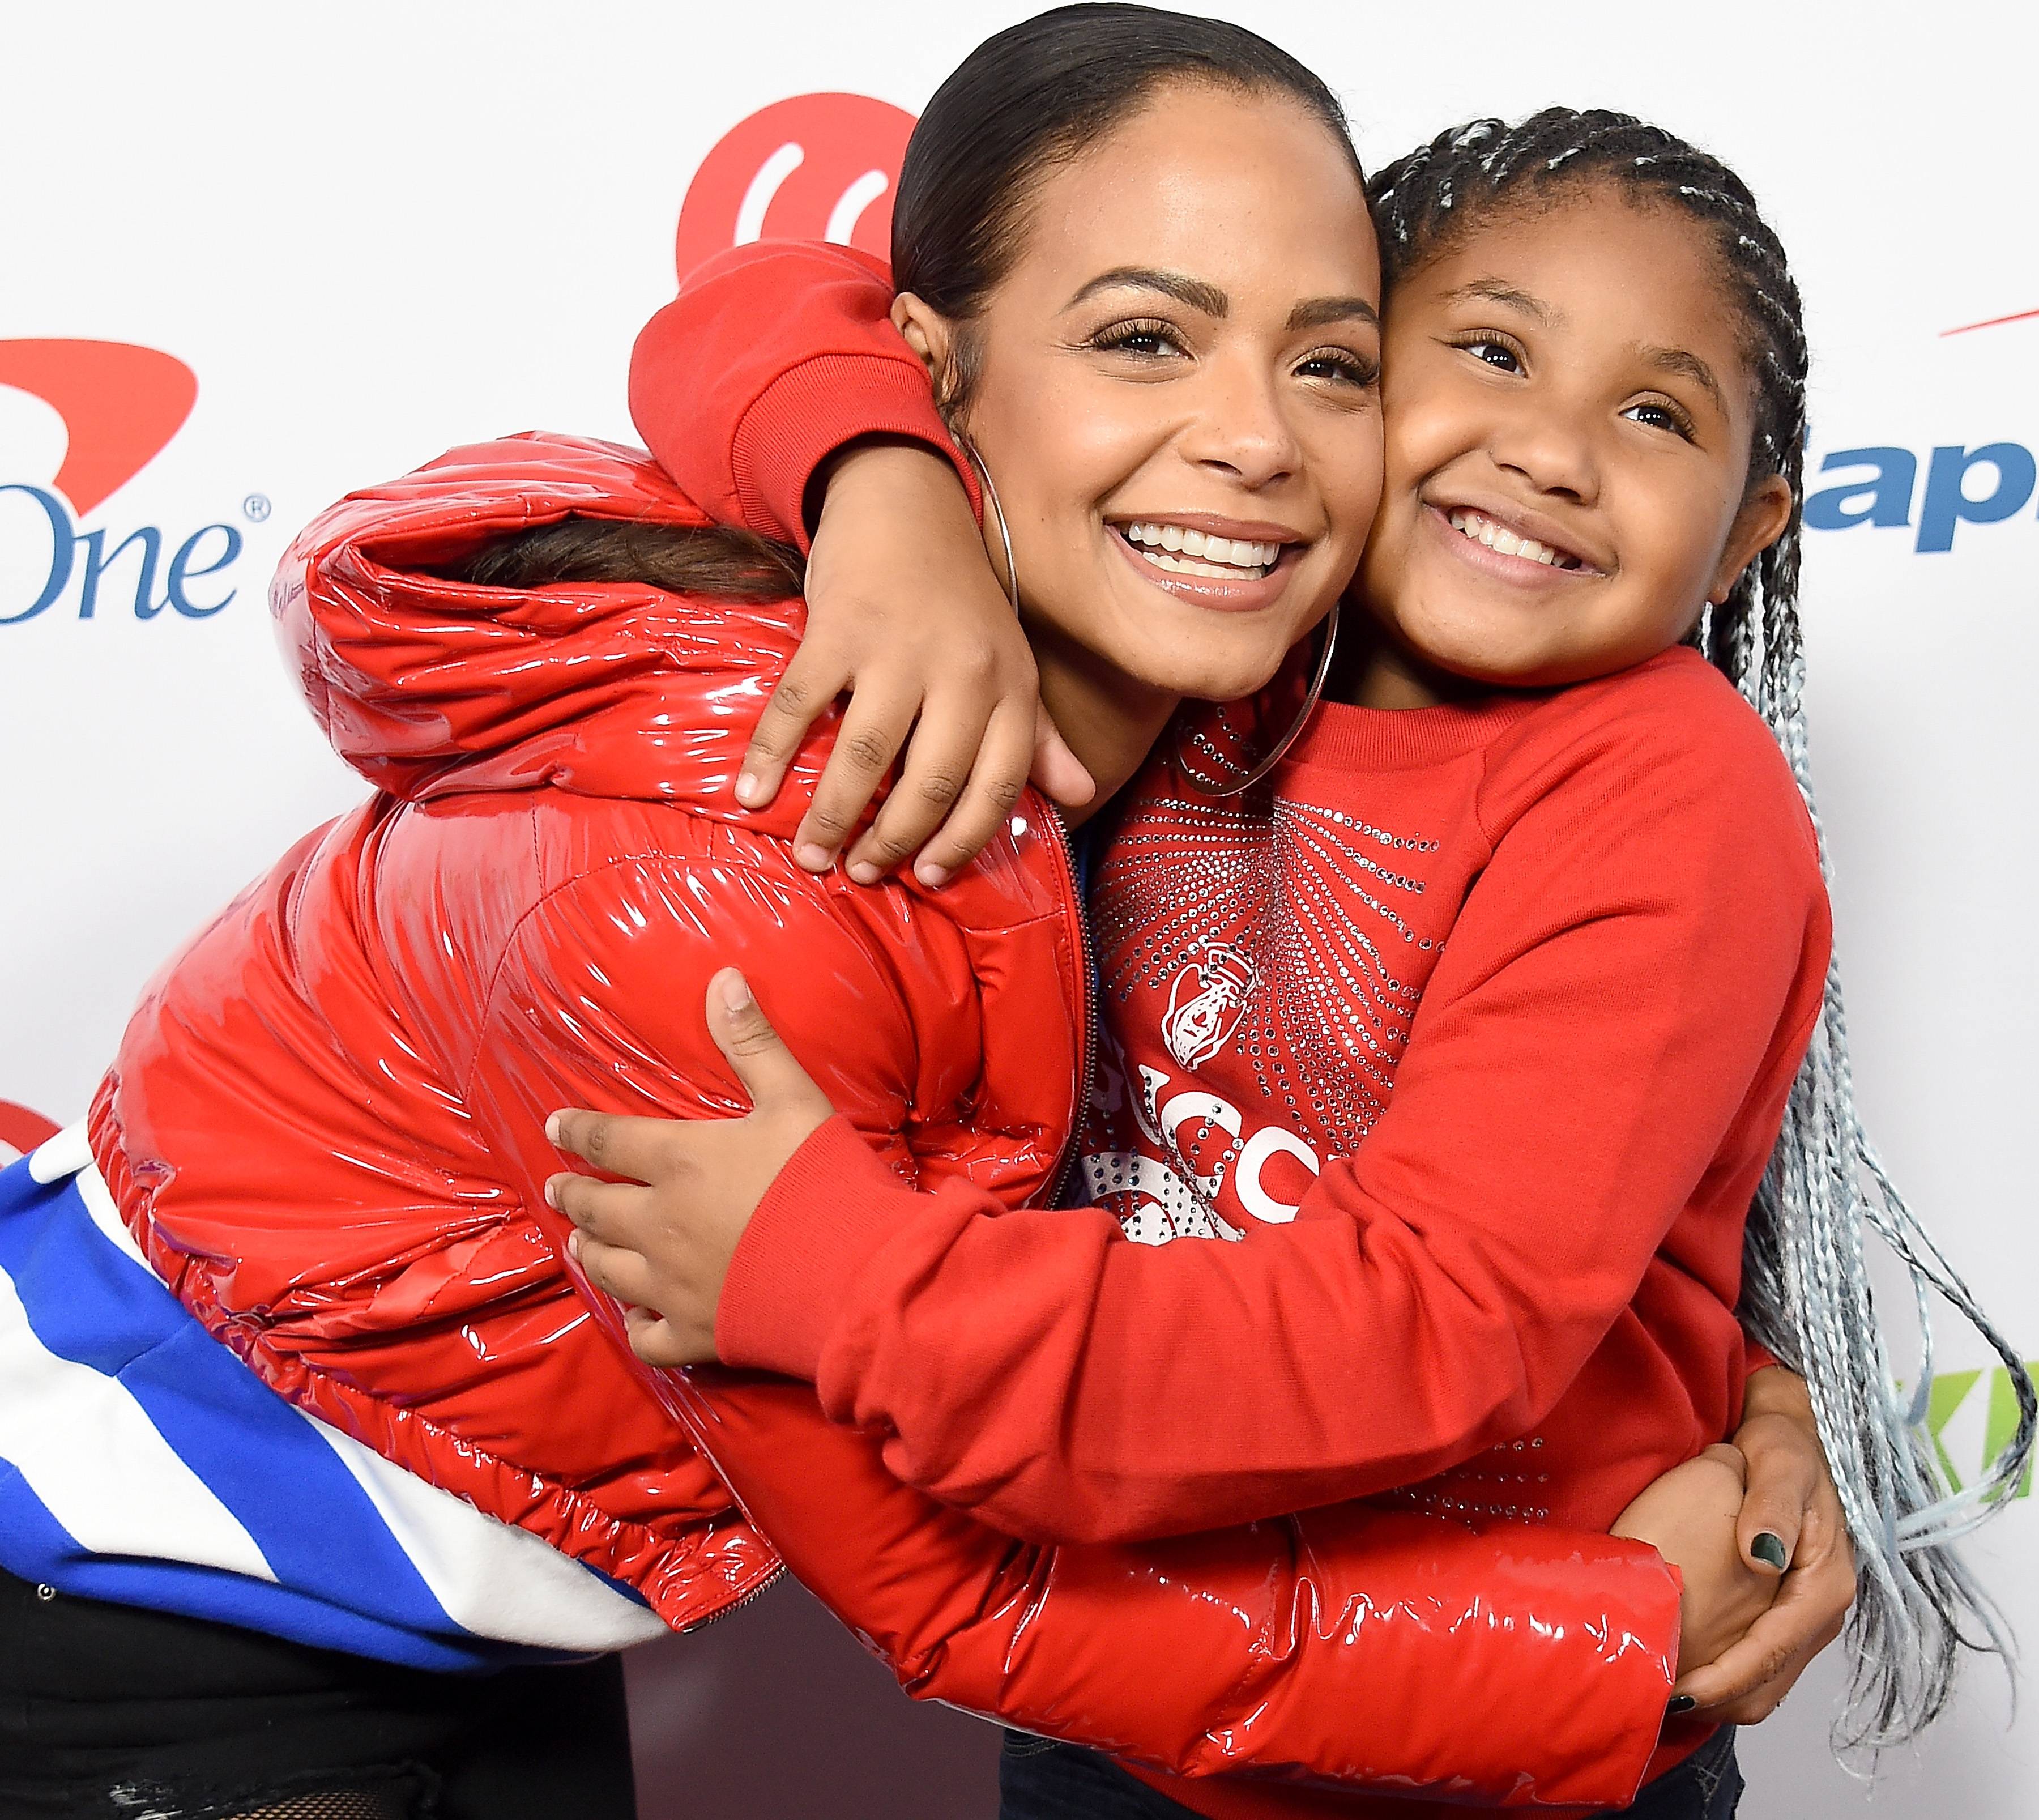 Celebrity Graduations: Christina Milian Throws Her Daughter A Graduation Party!